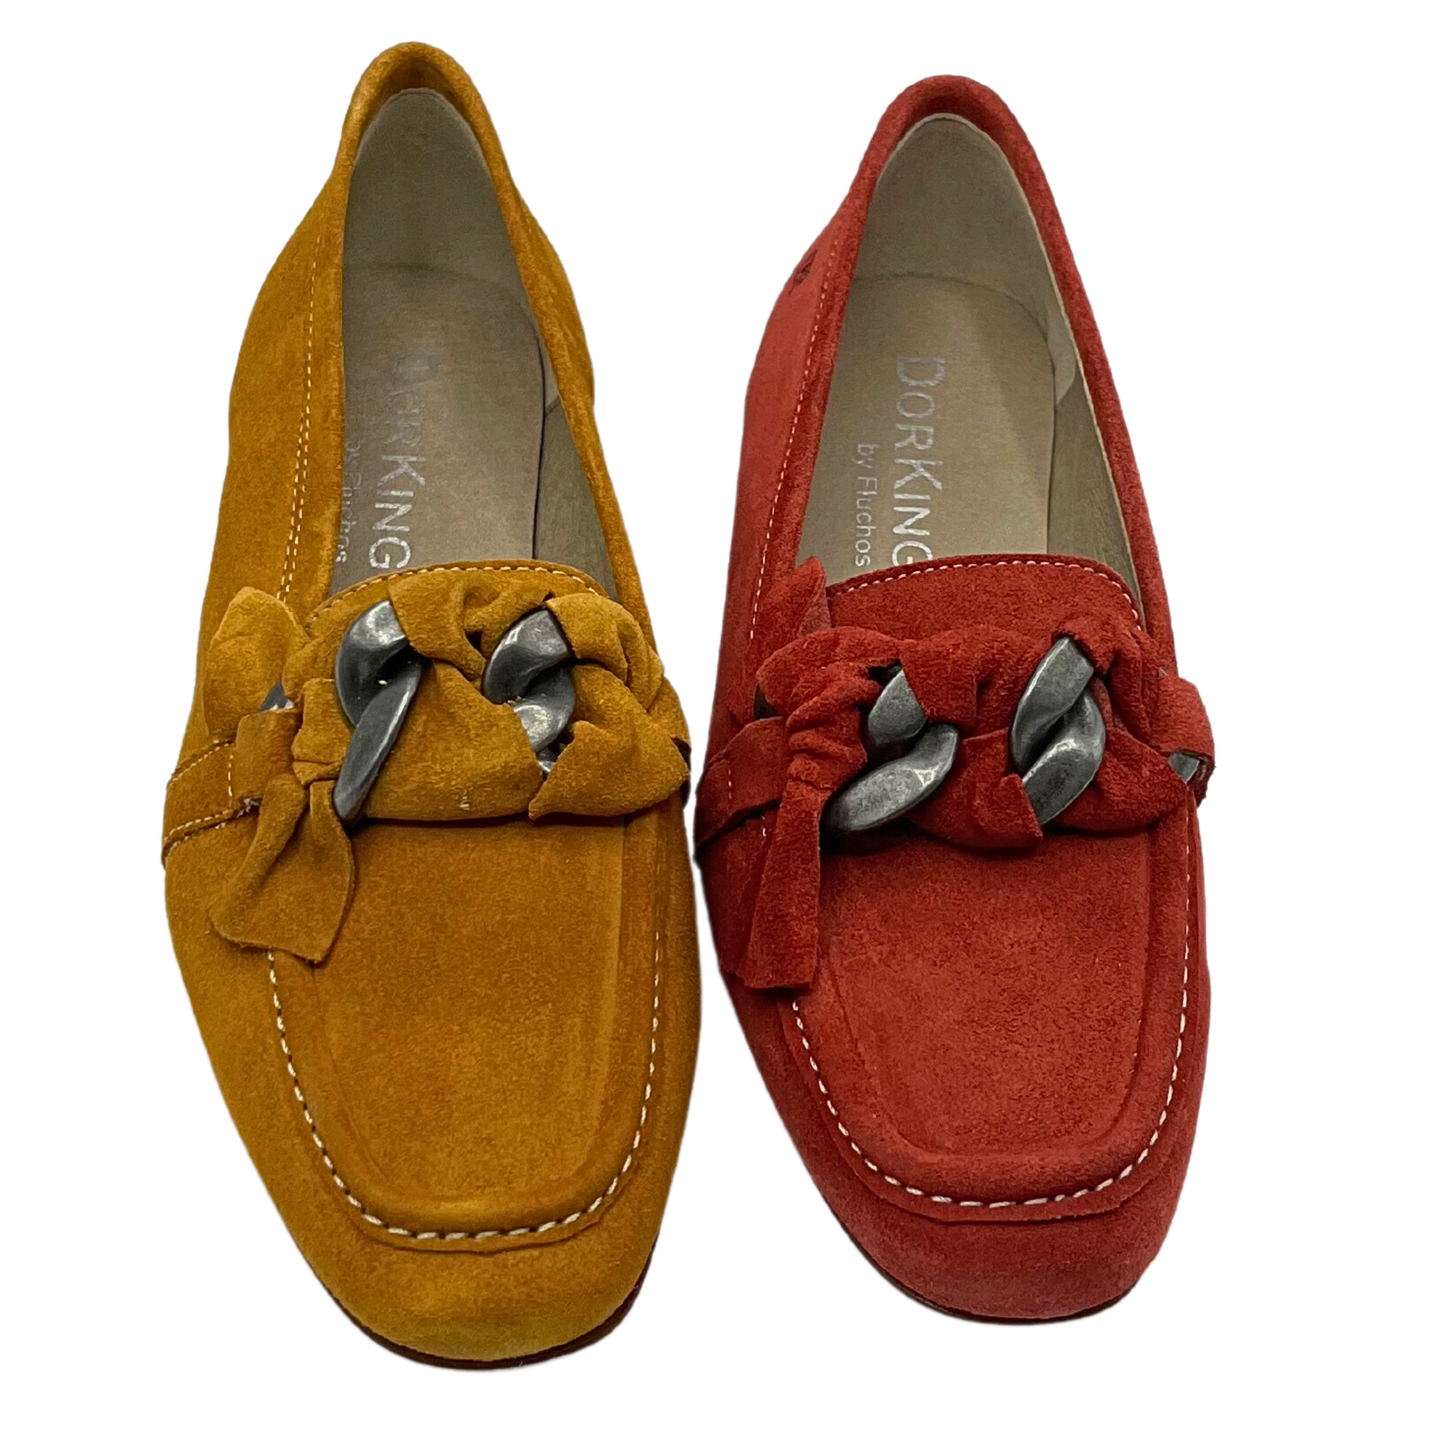 Top down view of a classic loafer done in a mustard and terracotta suede